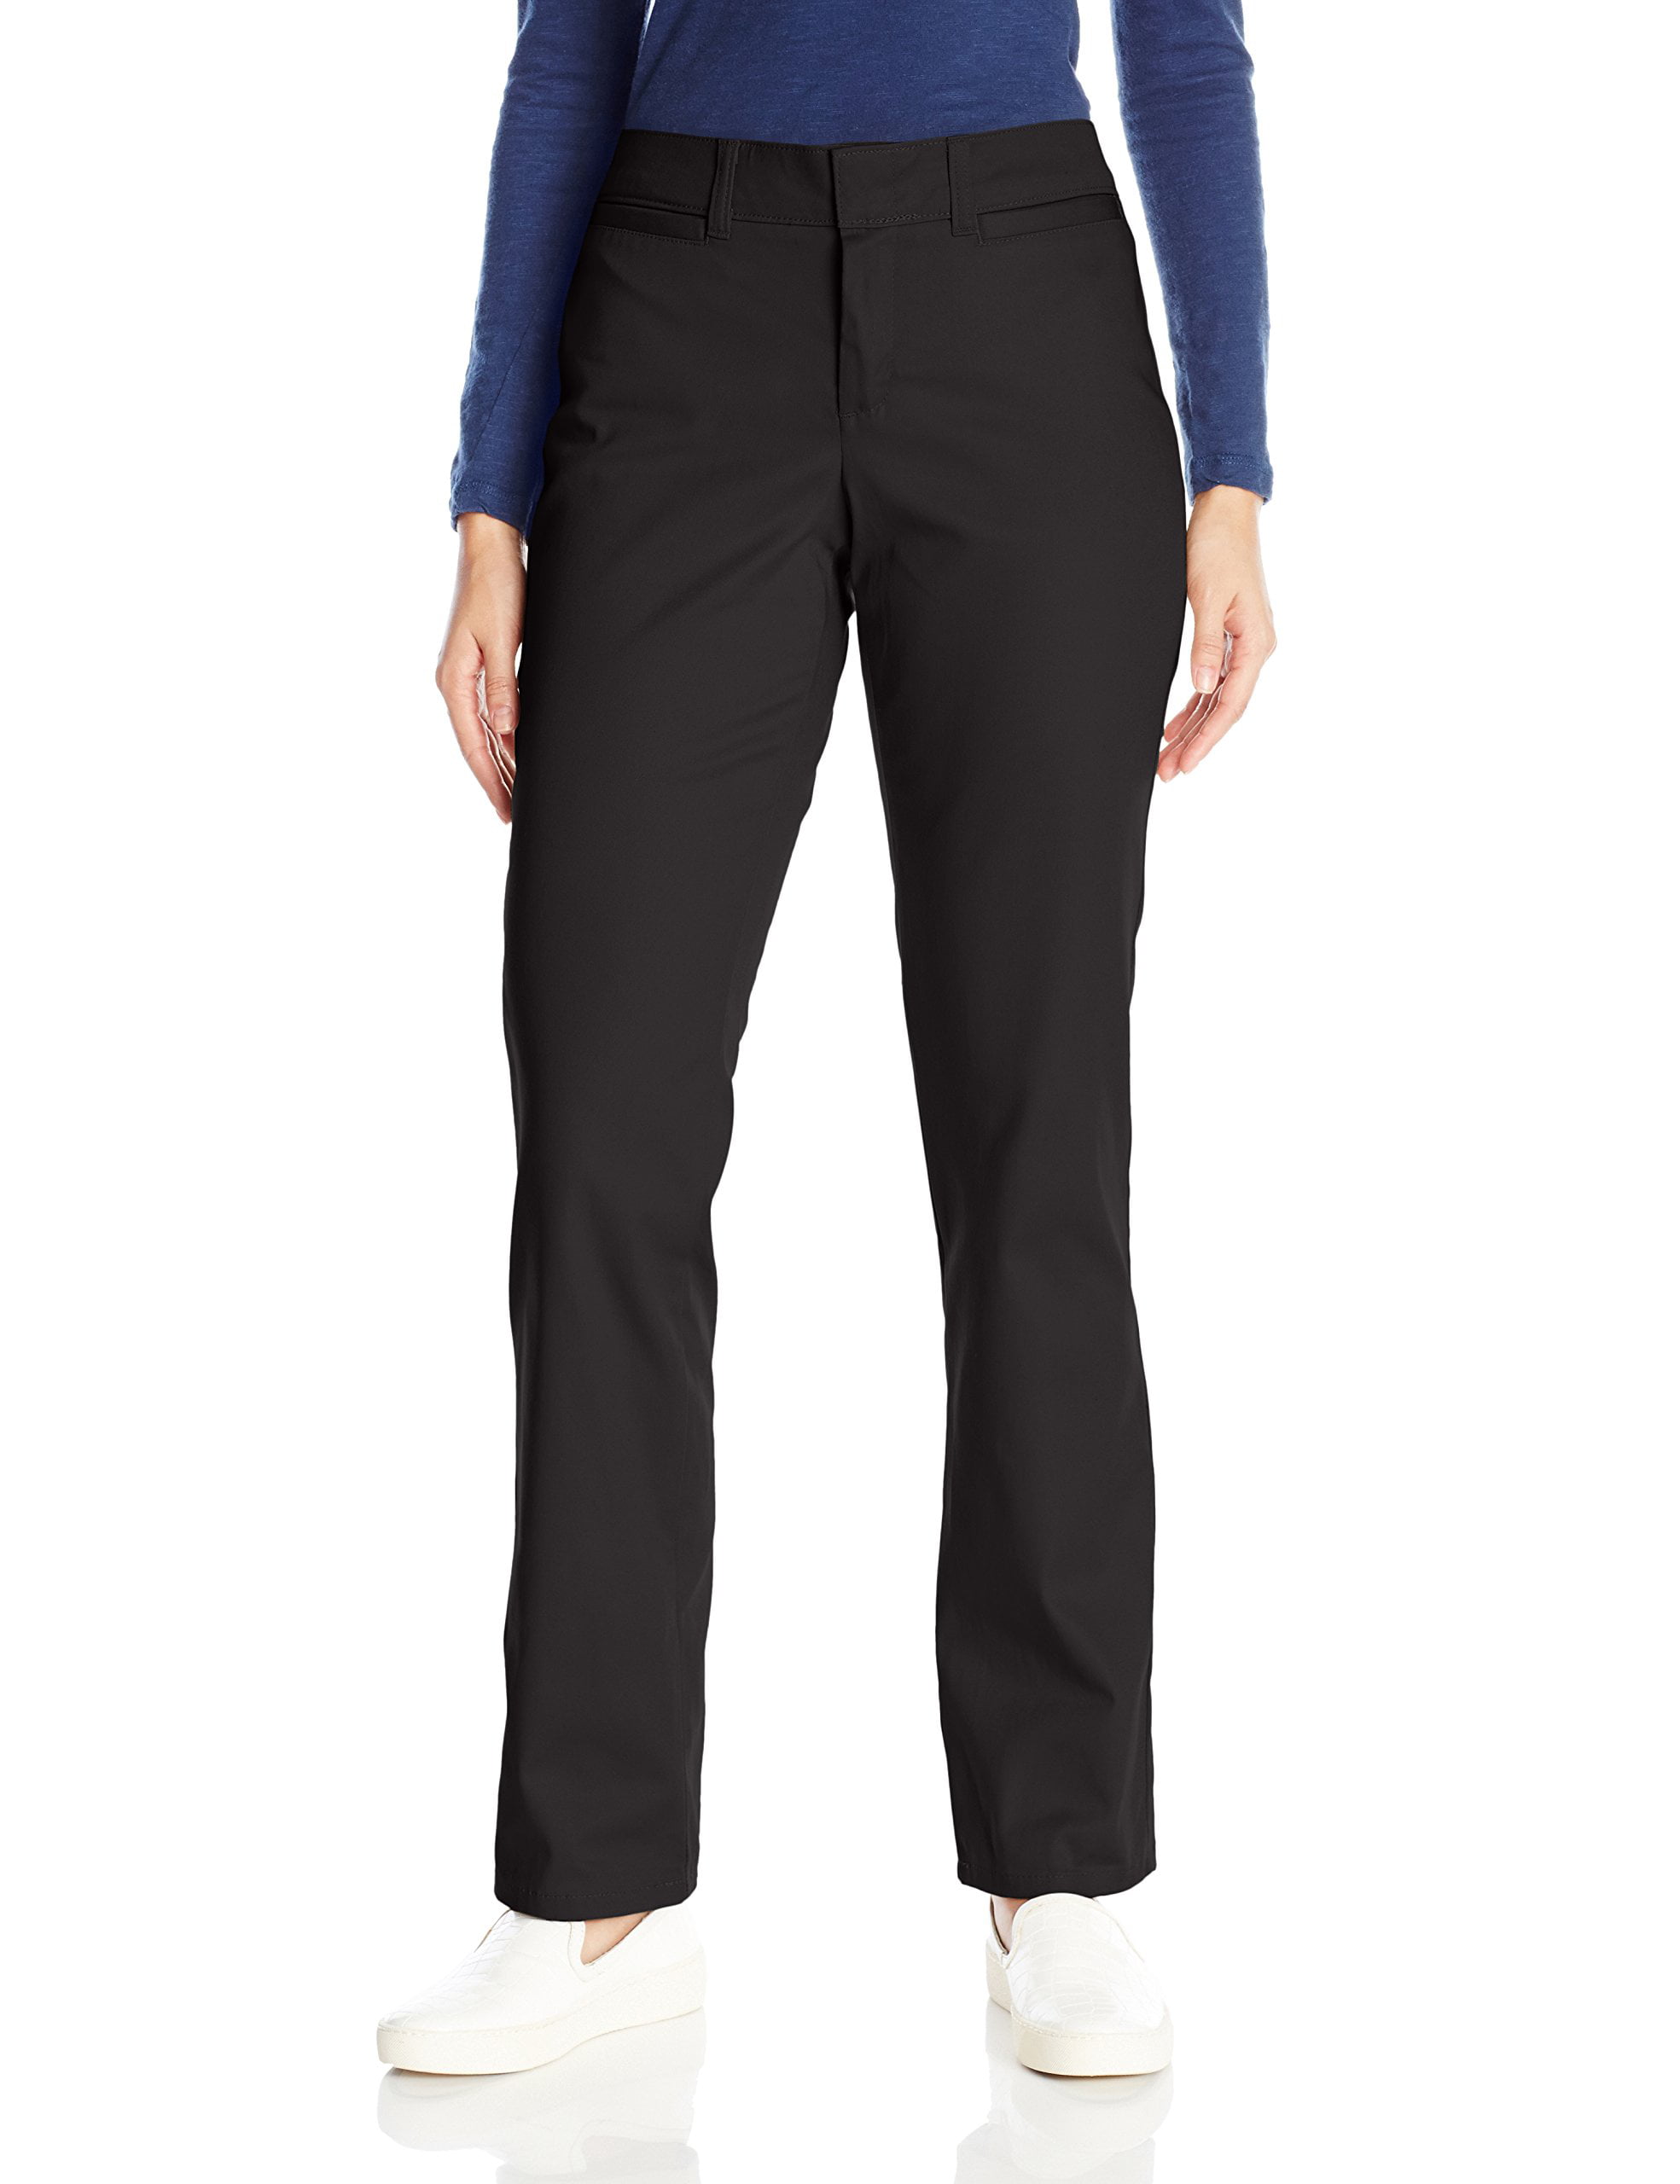 Catan - dickies women's relaxed straight stretch twill work pant, black ...